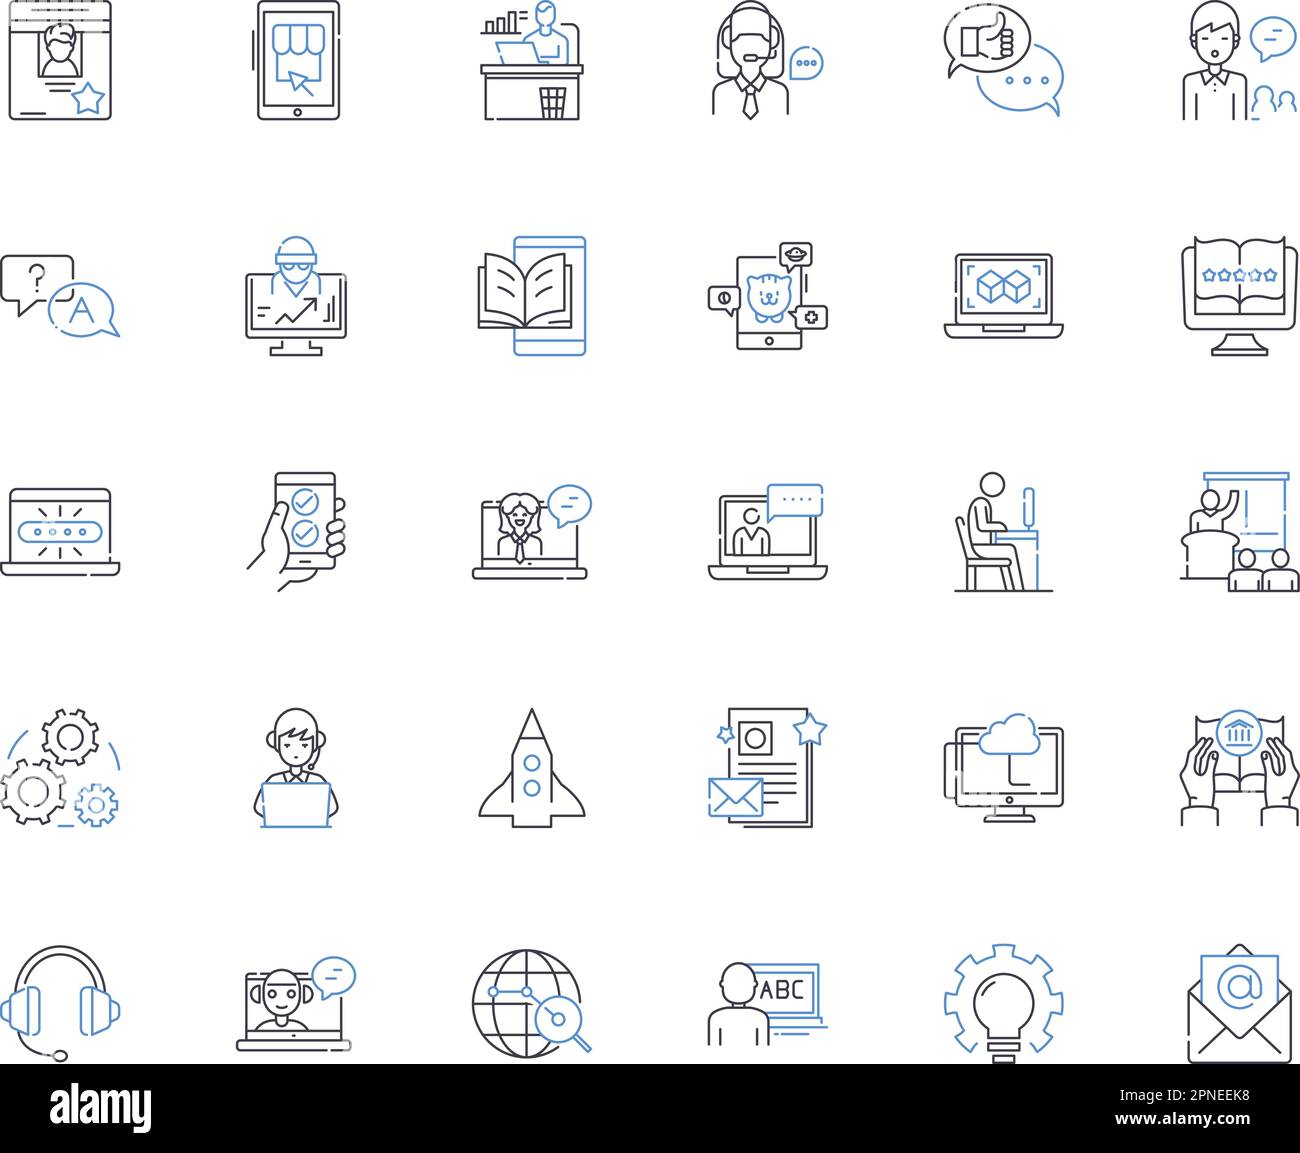 Social psychology line icons collection. Attitudes, Conformity, Socialization, Prejudice, Stereotypes, Groupthink, Compliance vector and linear Stock Vector